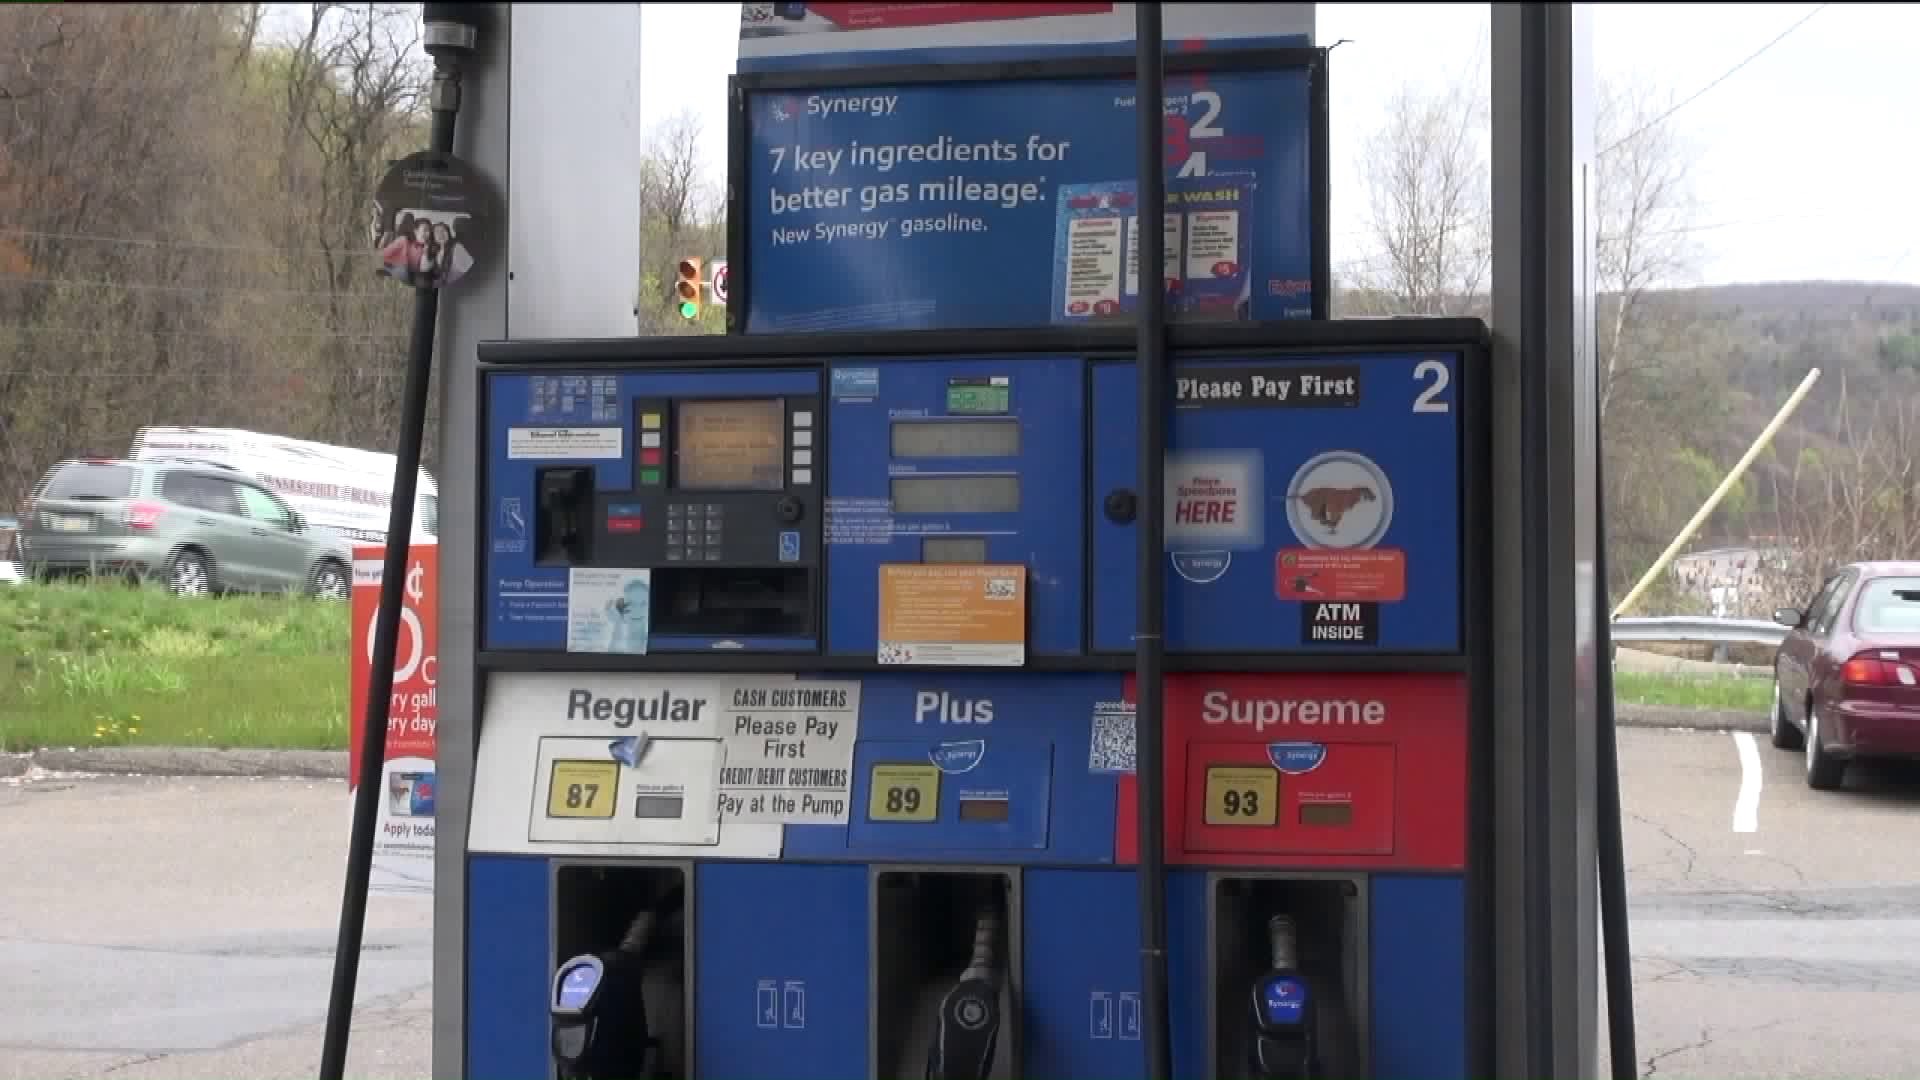 Sophisticated Skimmer Devices Found Inside Gas Station Pumps